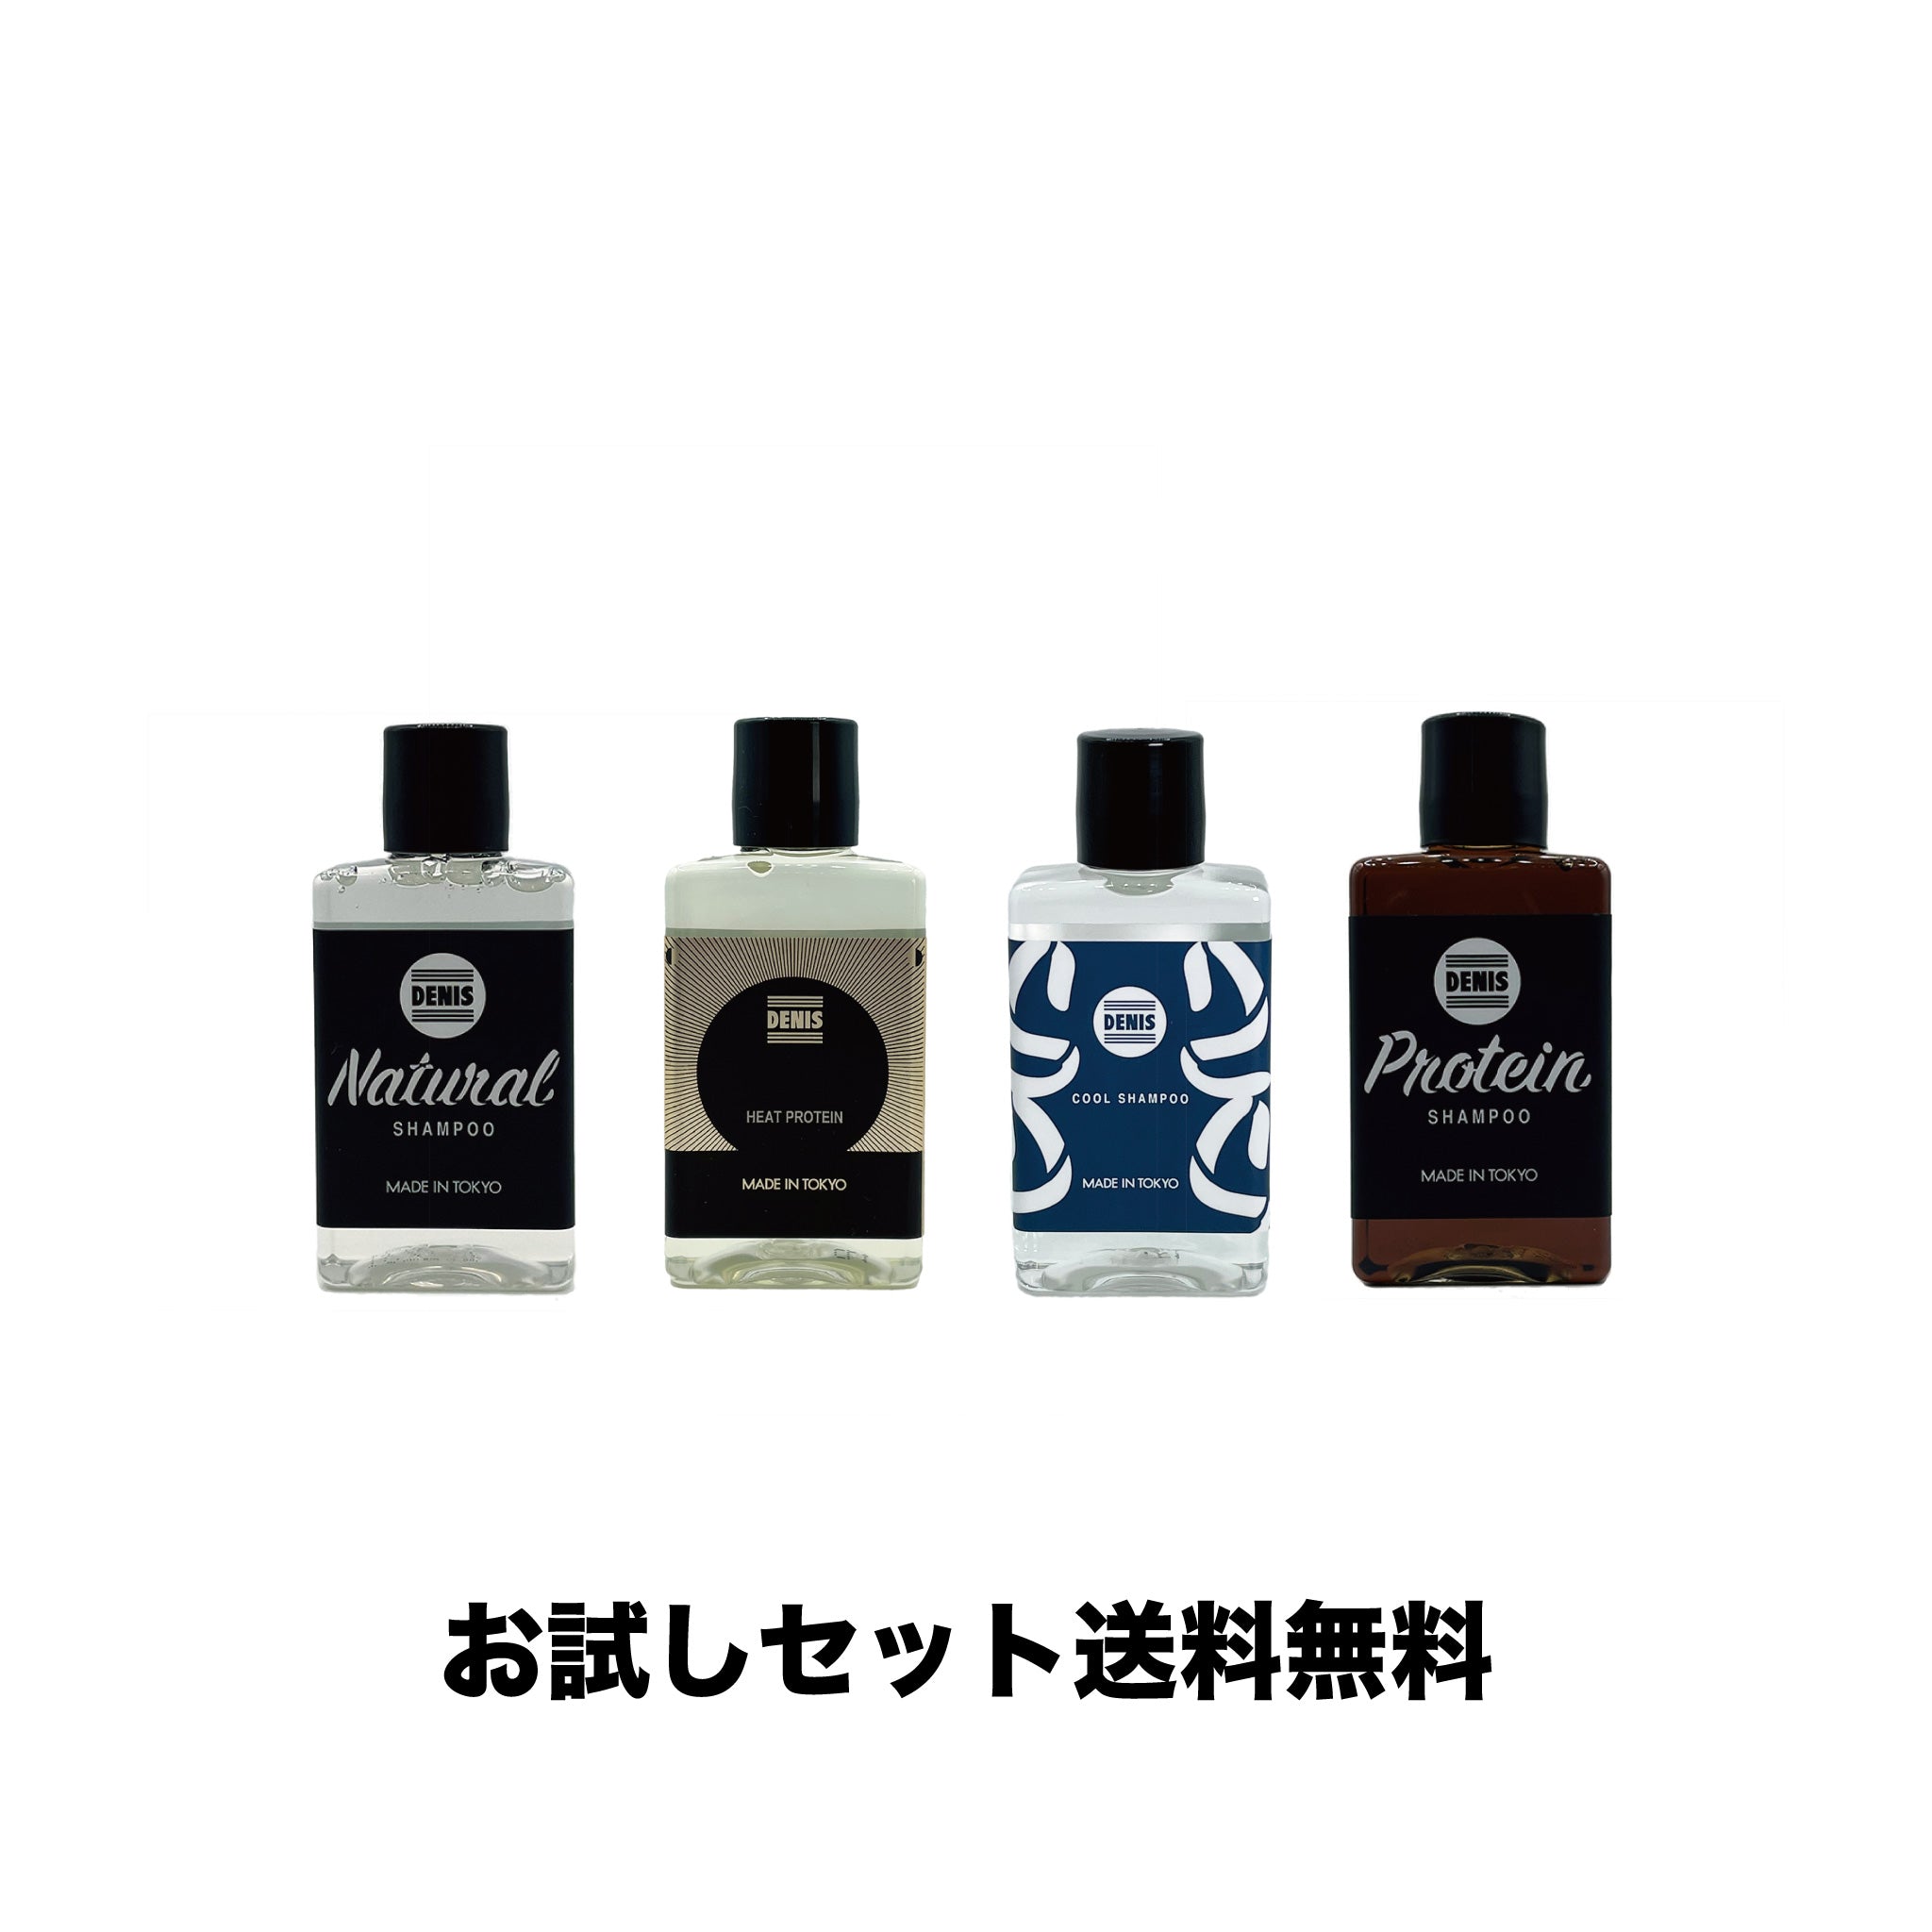 Best-selling Shampoo Trial Set [free shipping]